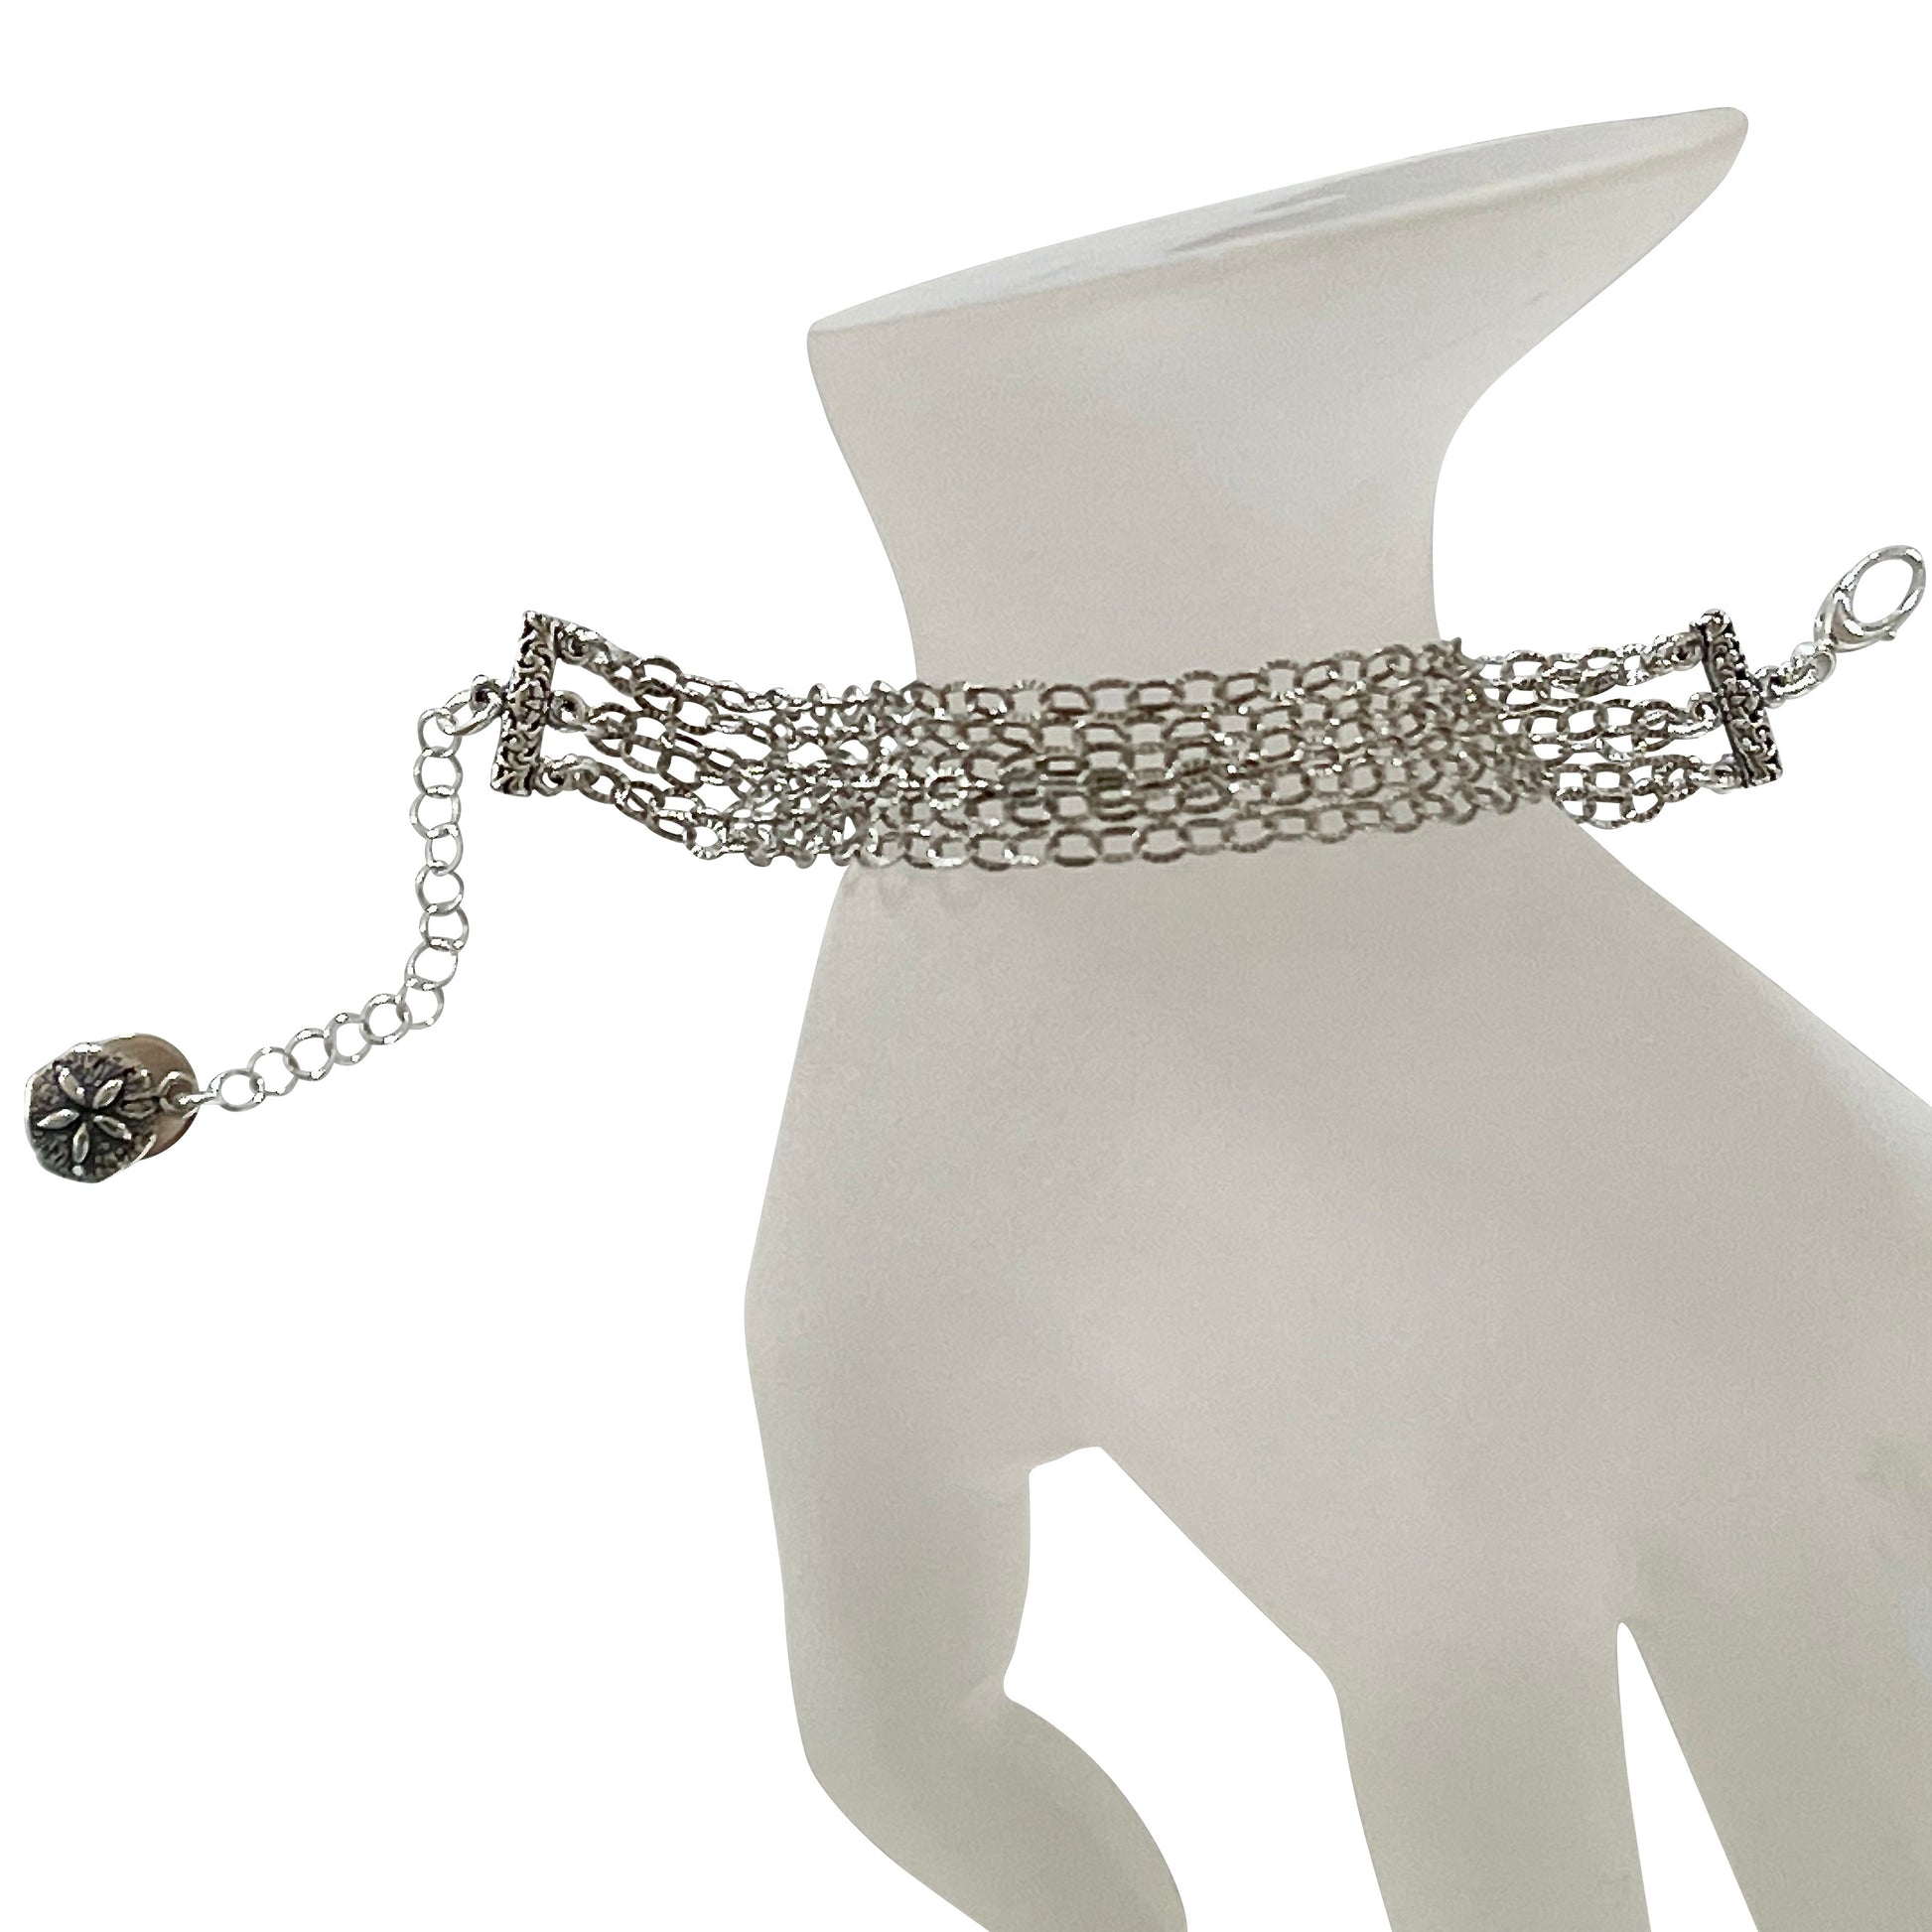 Sizing Image - beachlove silver chain bracelet on hand display / Arpaia